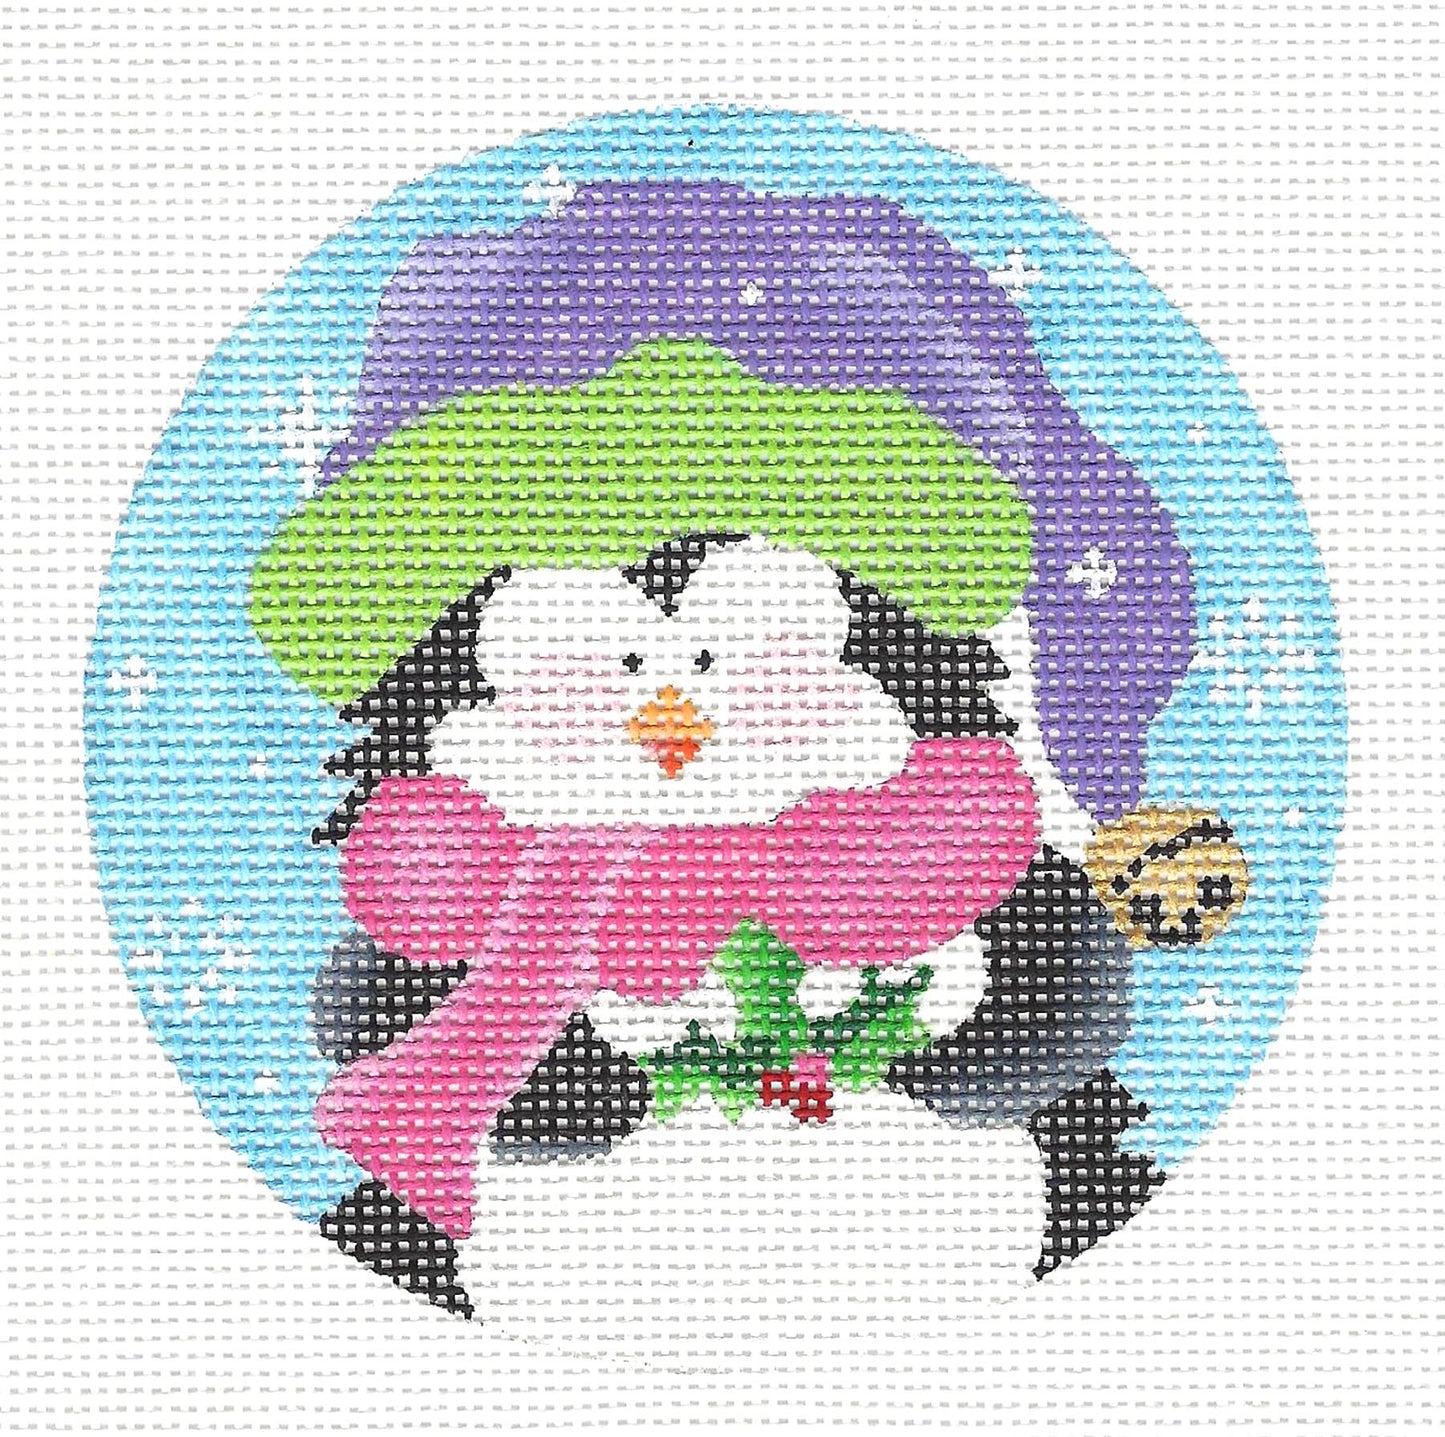 Round~Penguin in Pink Scarf-18 Mesh handpainted Needlepoint Canvas~by Pepperberry